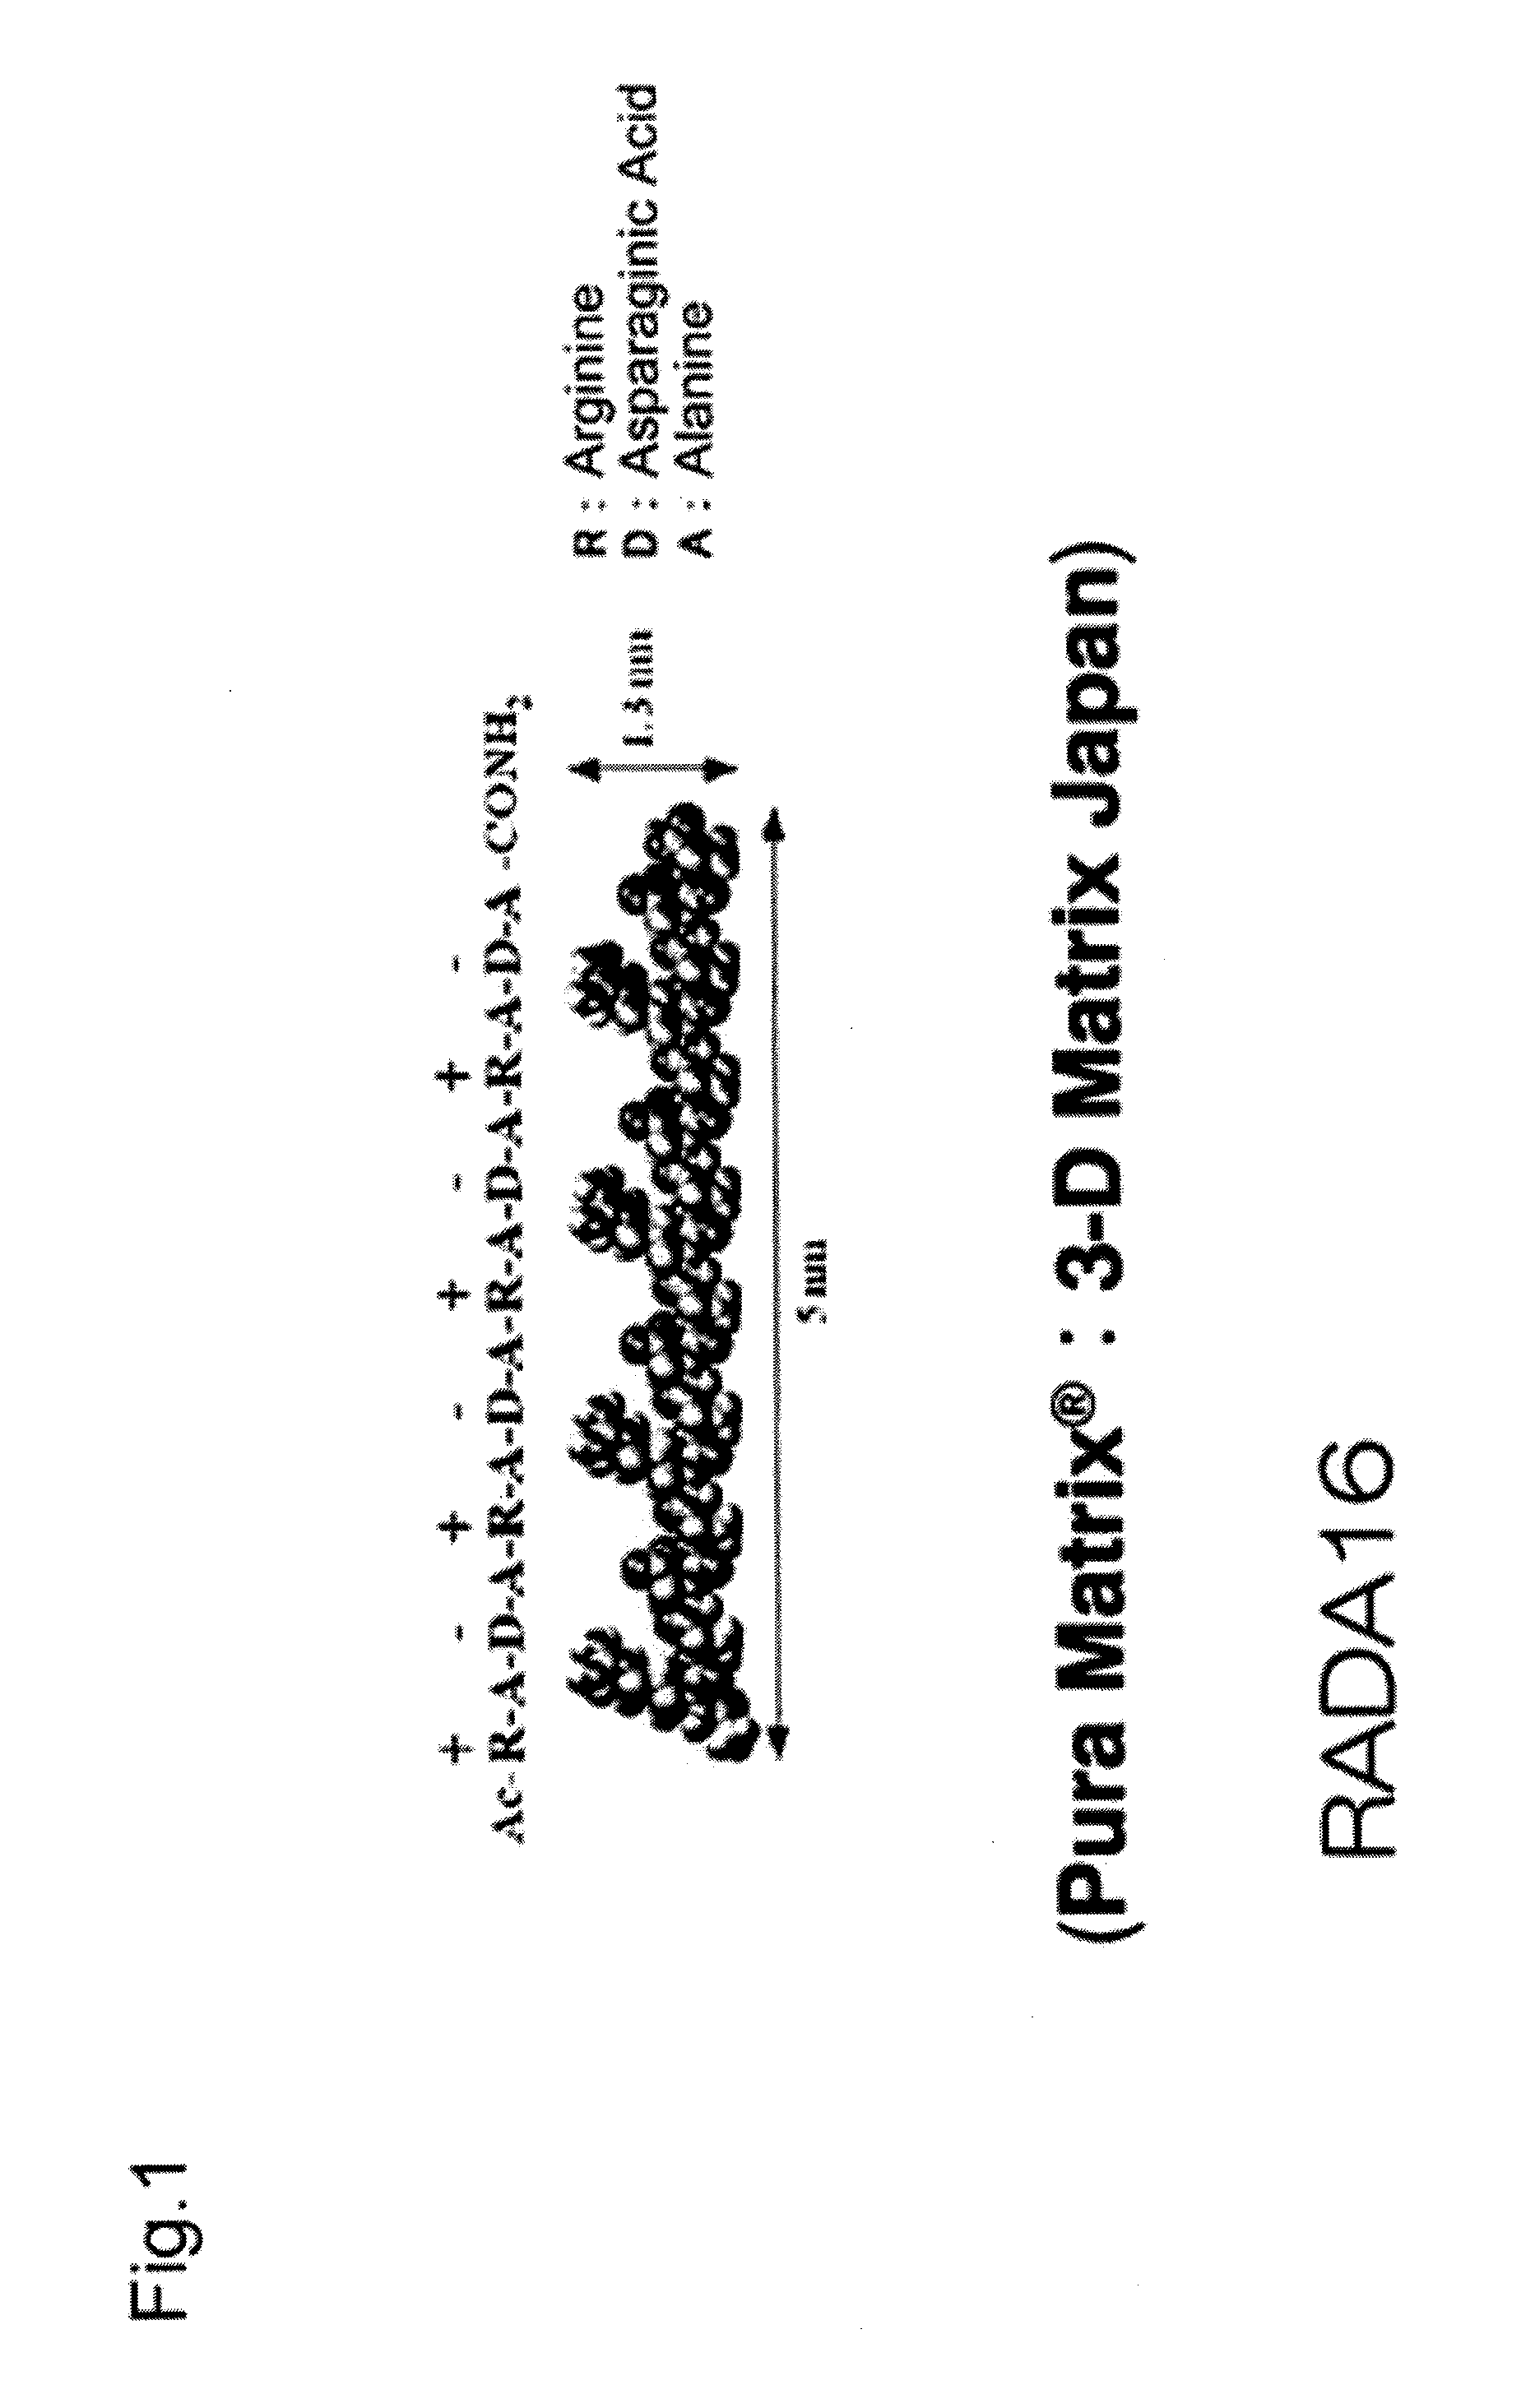 Method for producing artificial skin